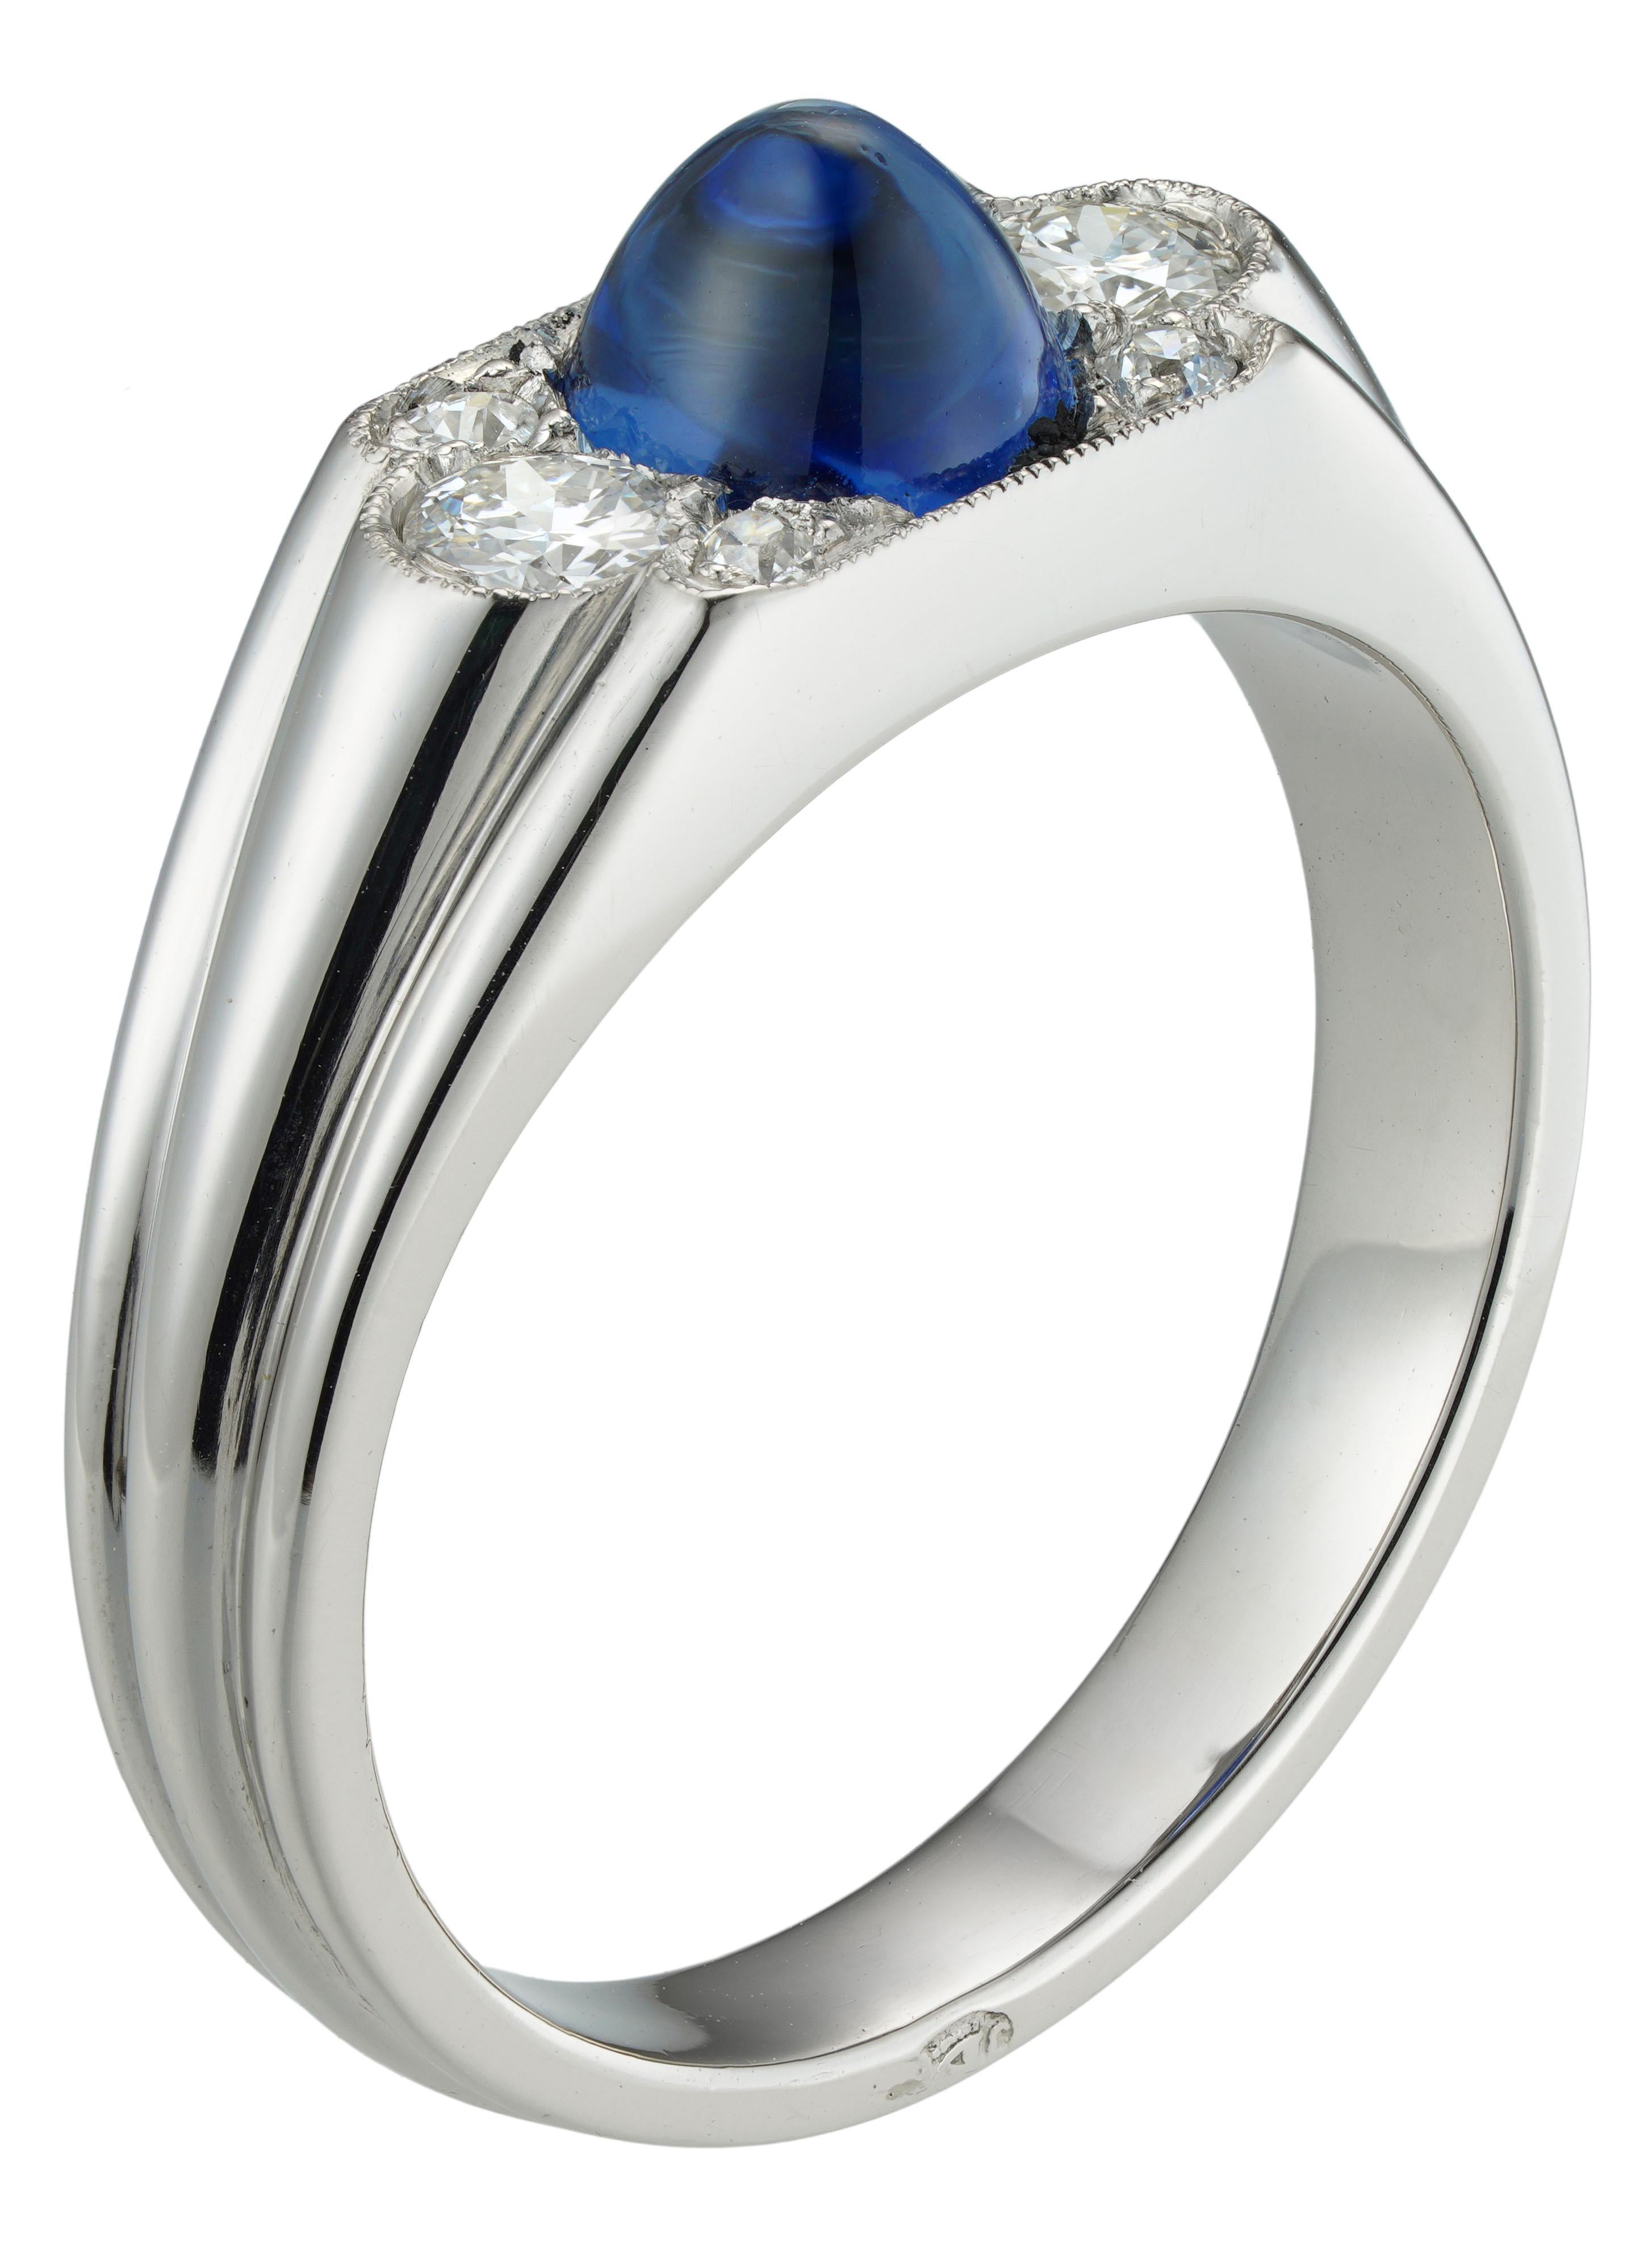 Cabochon An Art Deco Sapphire And Diamond Ring For Sale